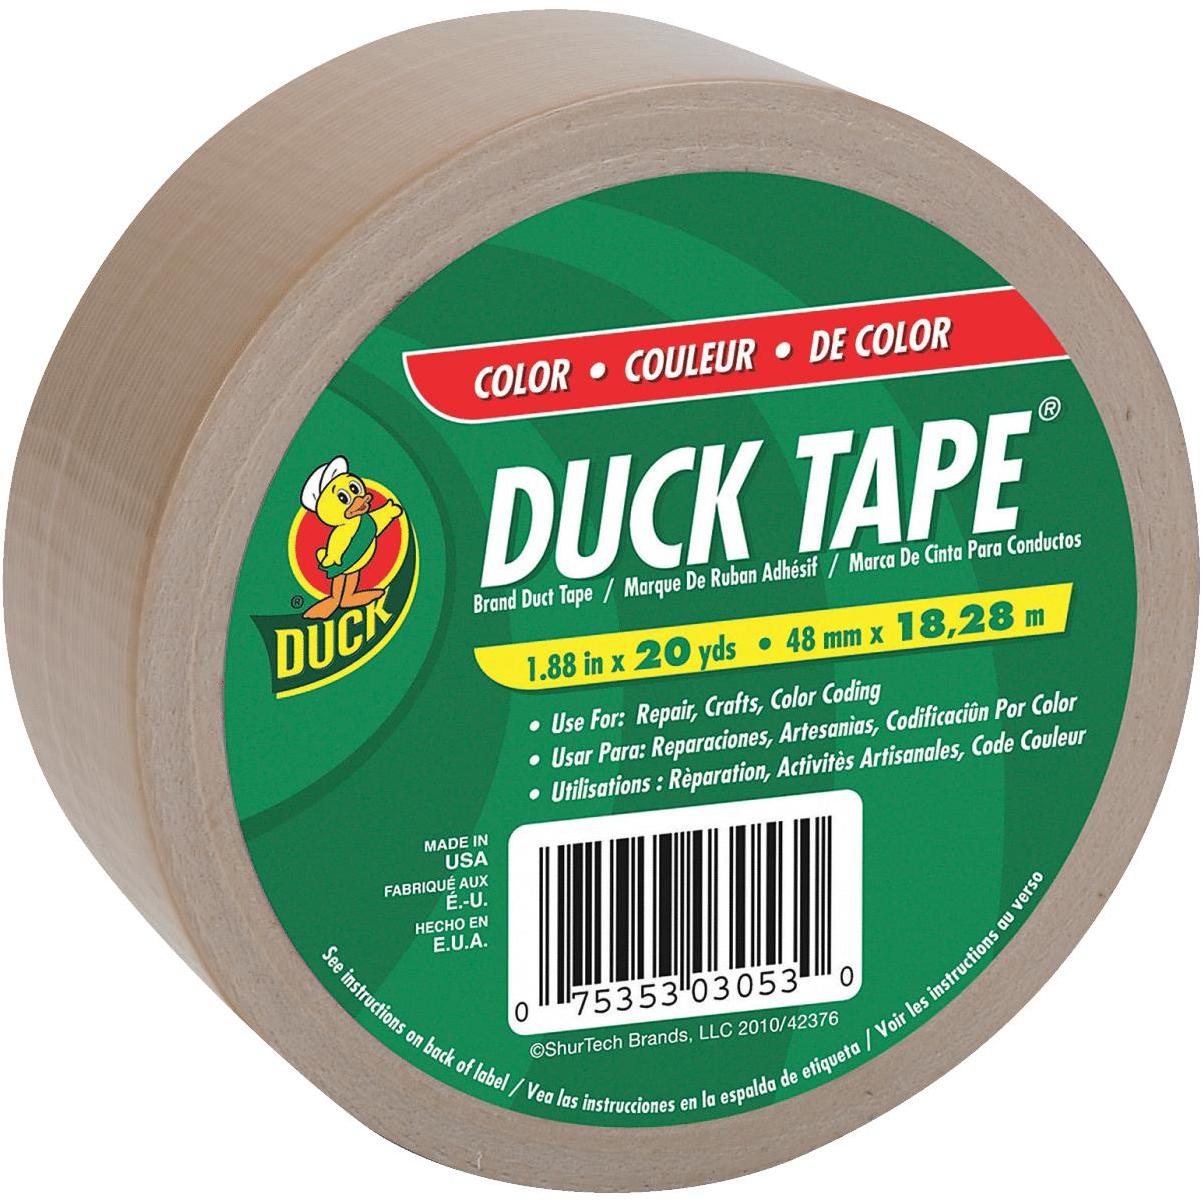 Duck Tape brand Duct Tape 20 yd